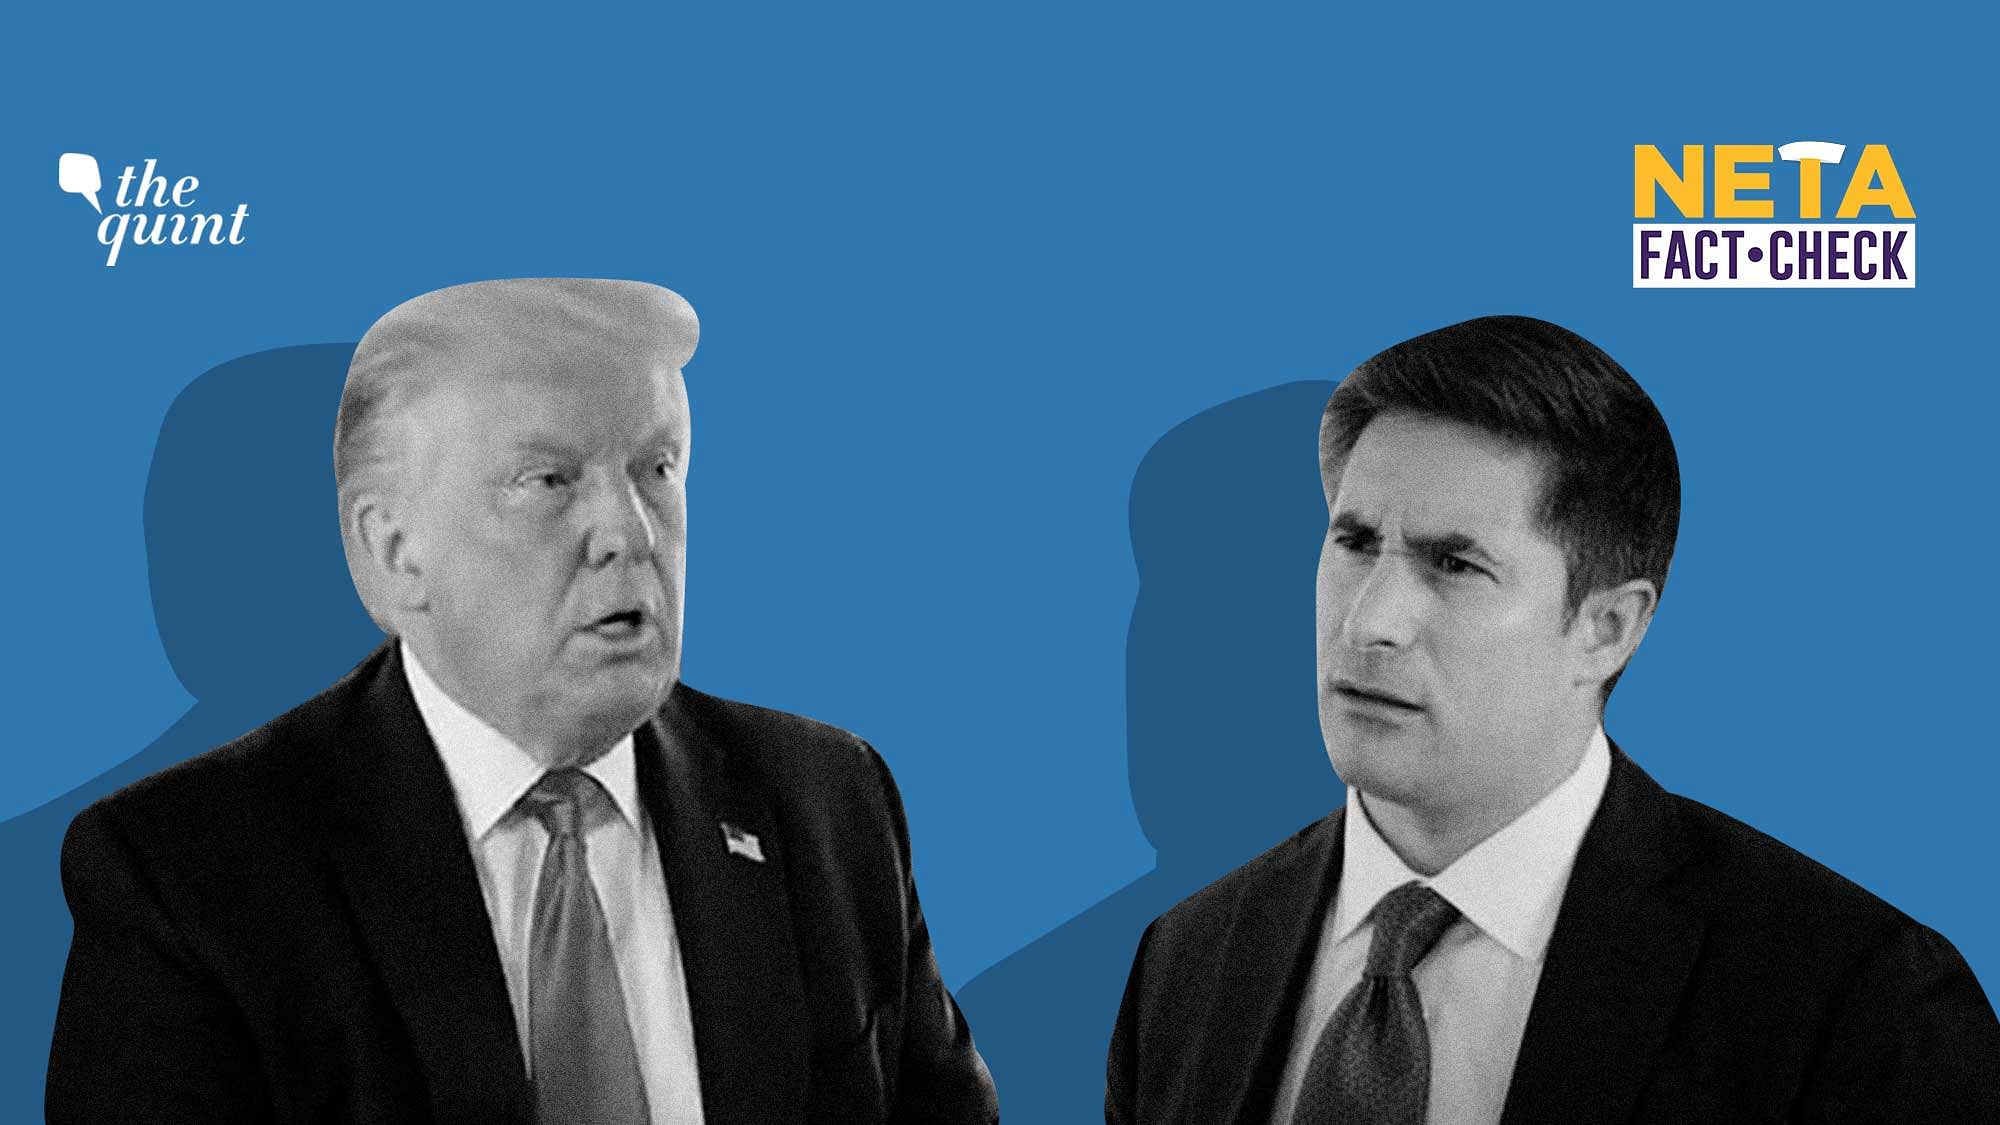 Journalist Jonathan Swan interviewed the US President Donald Trump at the White House for an American news website, Axios. 